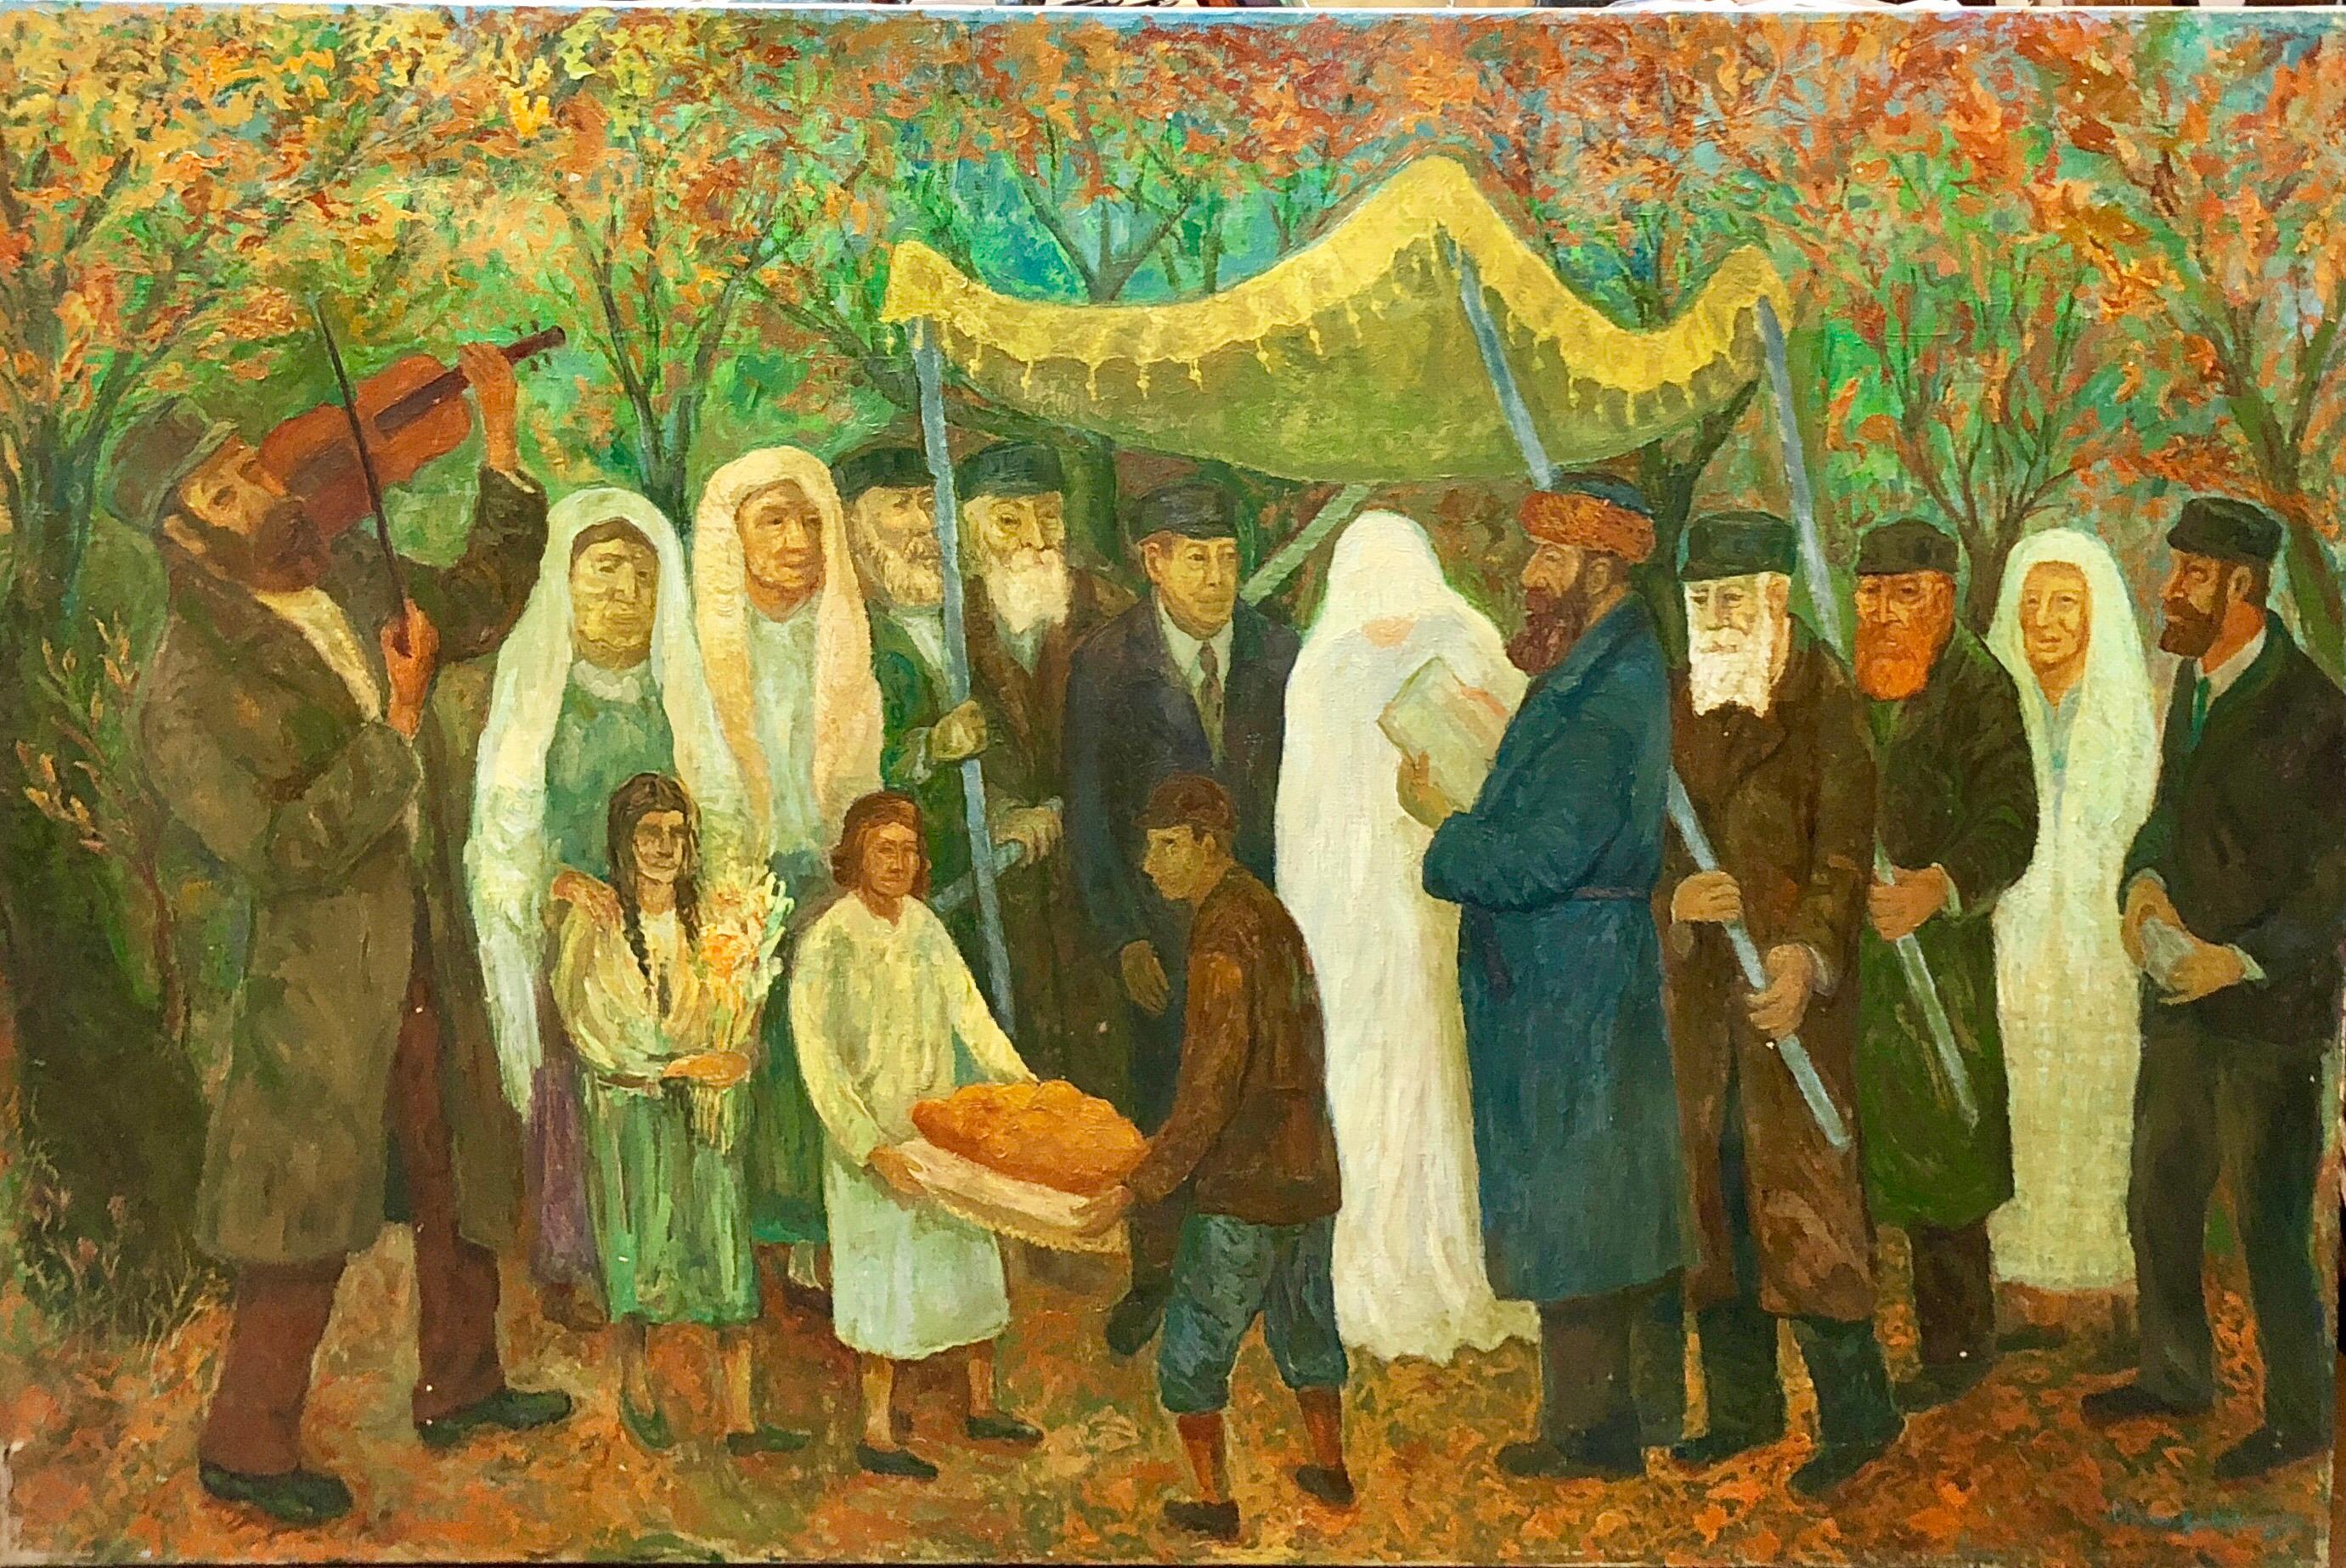 

Genre: Judaica
Subject: Architecture
Medium: Oil
Surface: Canvas
Country: United States
Dimensions: 40X60 inches
Temple 

Chaim Goldberg -- born in the Polish shtetl of Kazimierz Dolny
Chaim Goldberg has worked in nearly every medium available to